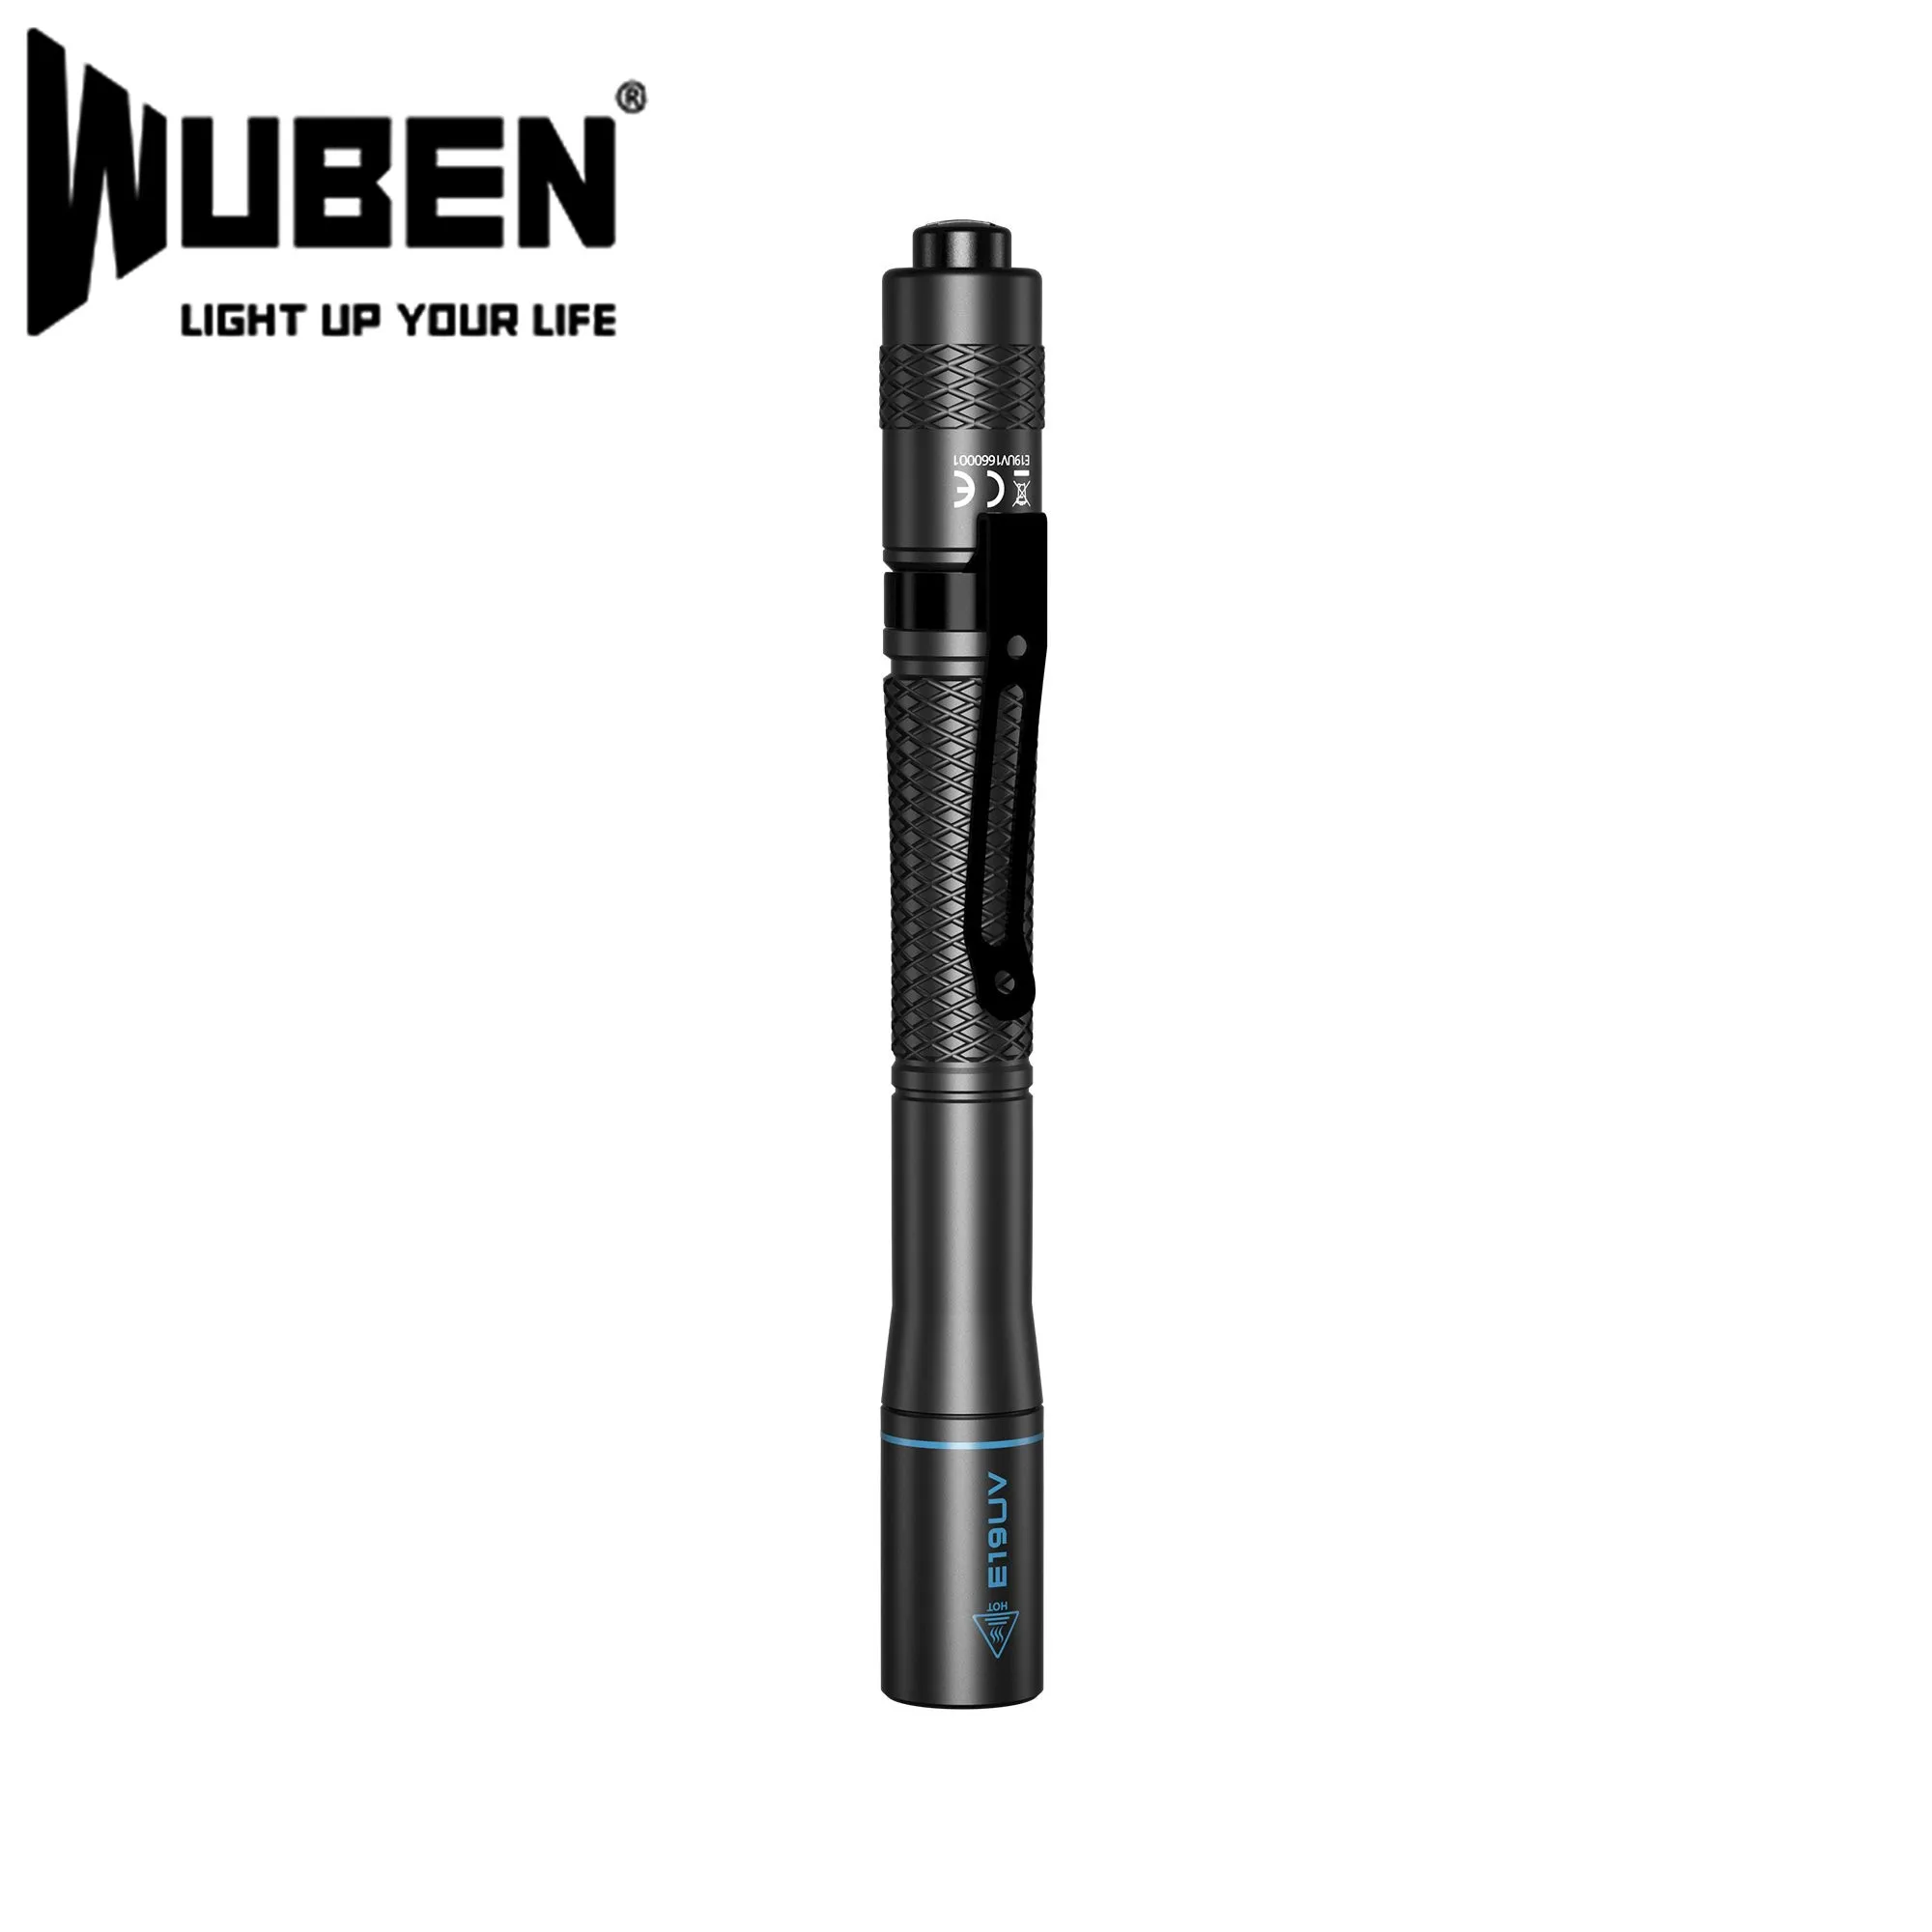 

WUBEN L19 UV LED flashlight Ultraviolet Torch 365nm UV Light 850mW max output AAA battery light for Pet Urine Stains detection